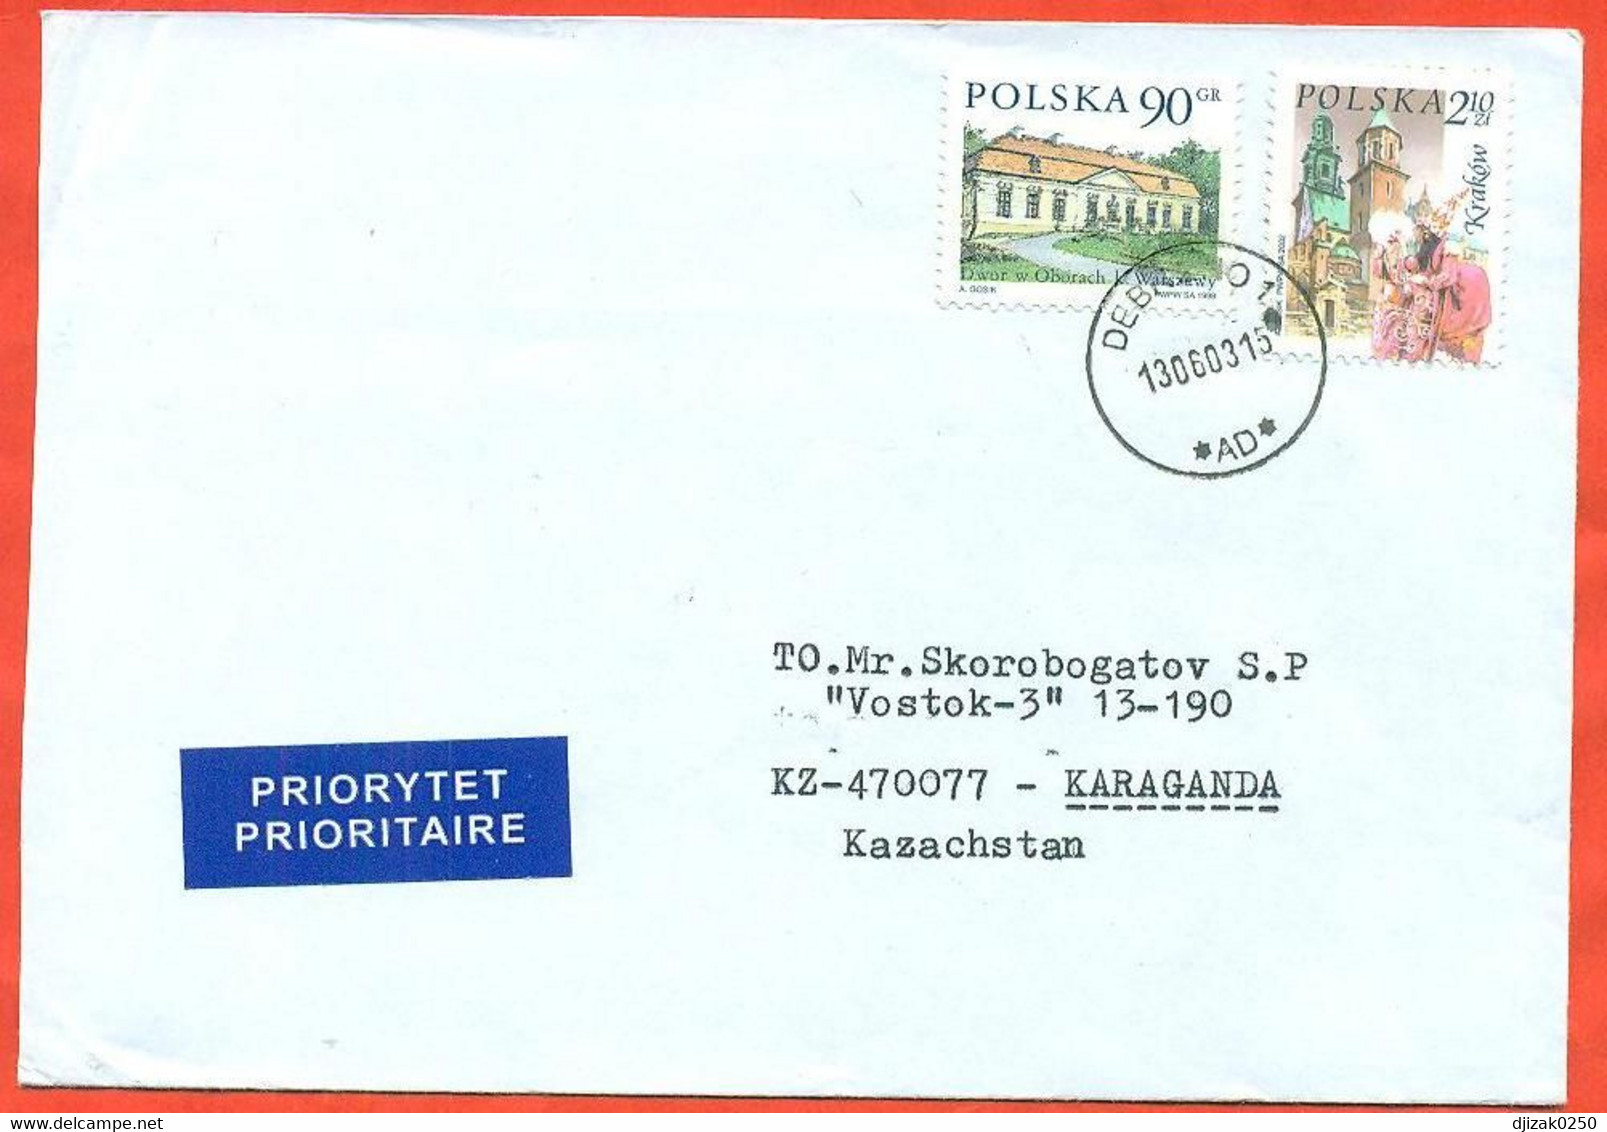 Poland 2003. The Envelope With  Passed Through The Mail. Airmail. - Covers & Documents